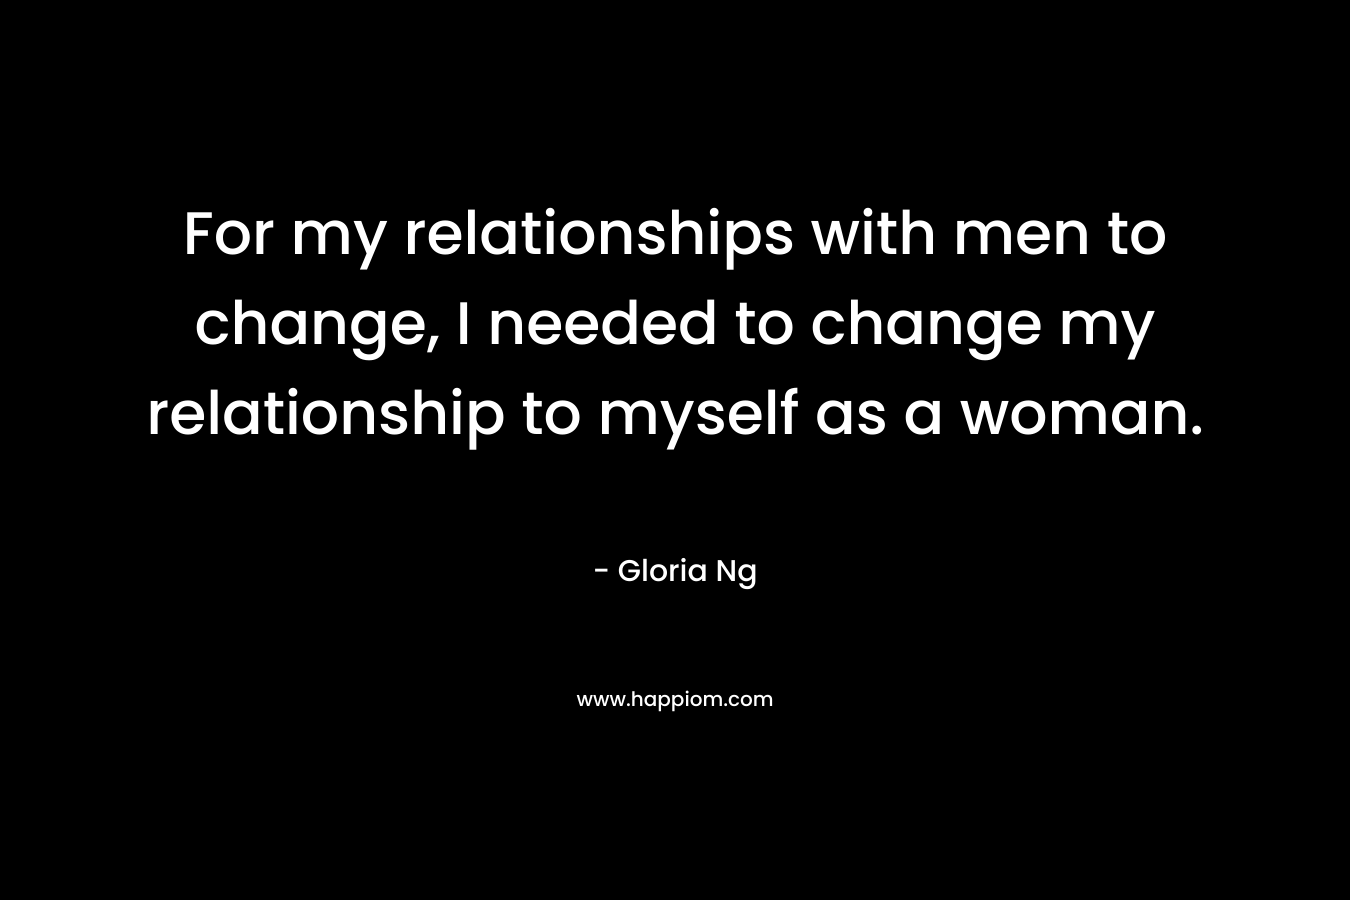 For my relationships with men to change, I needed to change my relationship to myself as a woman.